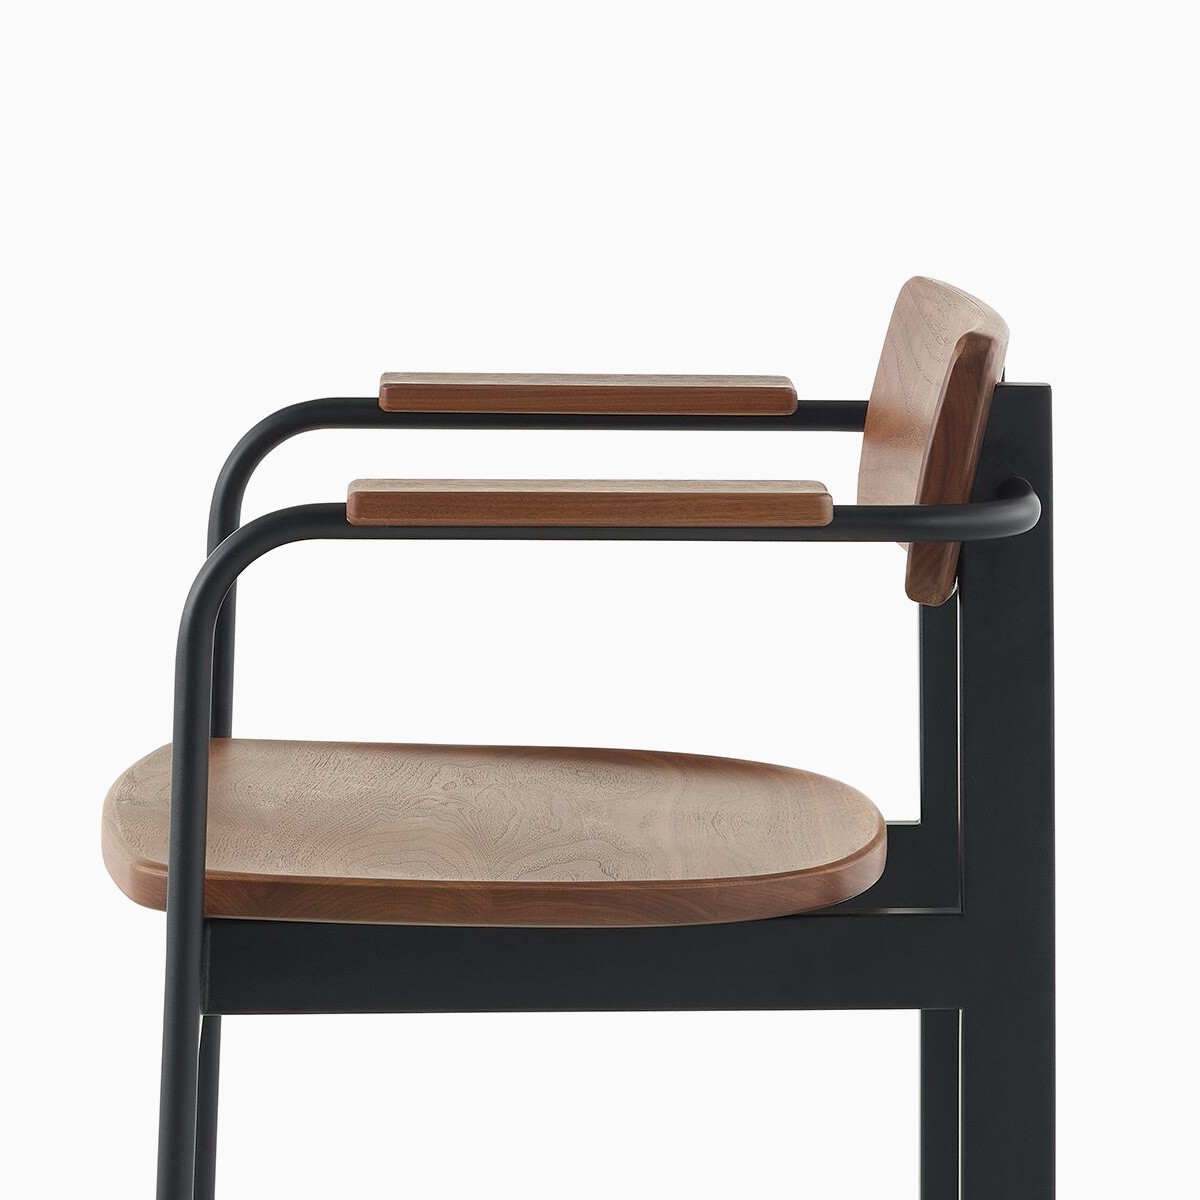 A Betwixt Chair with a walnut backrest, seat and arms with a black frame.